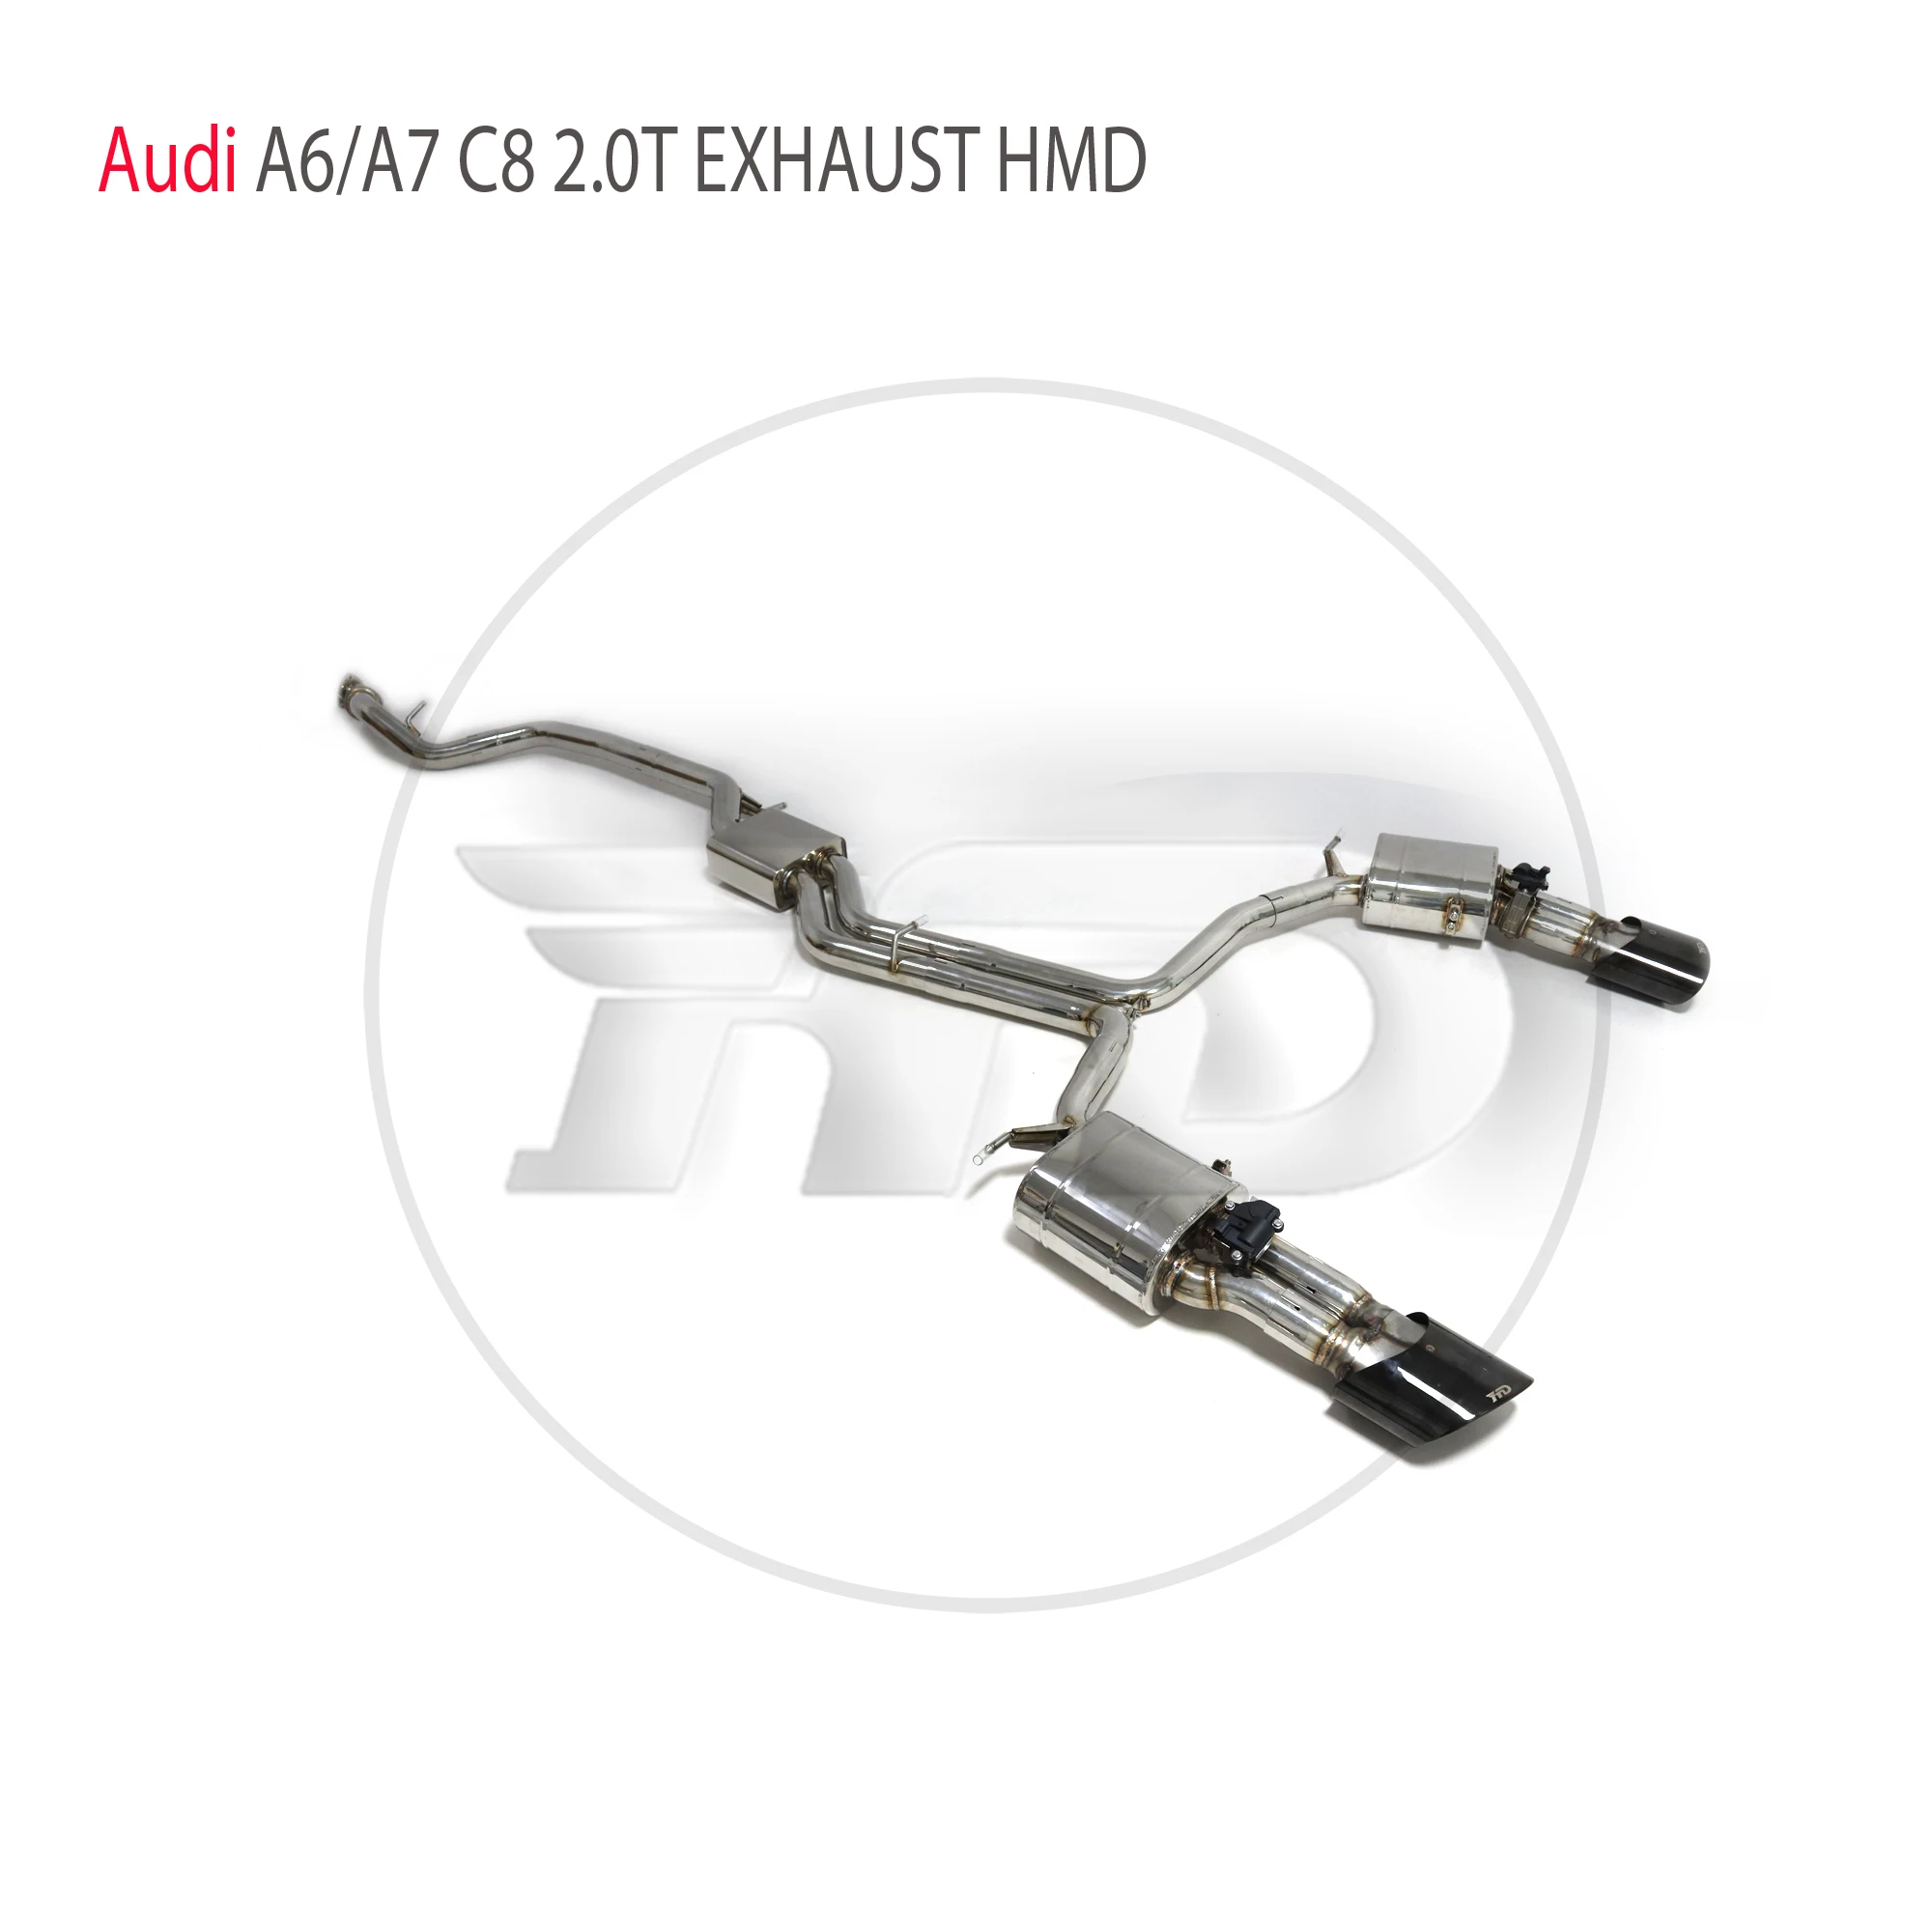 

HMD Stainless Steel Exhaust System Performance Catback for Audi A6 A7 C8 2.0T Resonator Valve Muffler With RS Style Tips